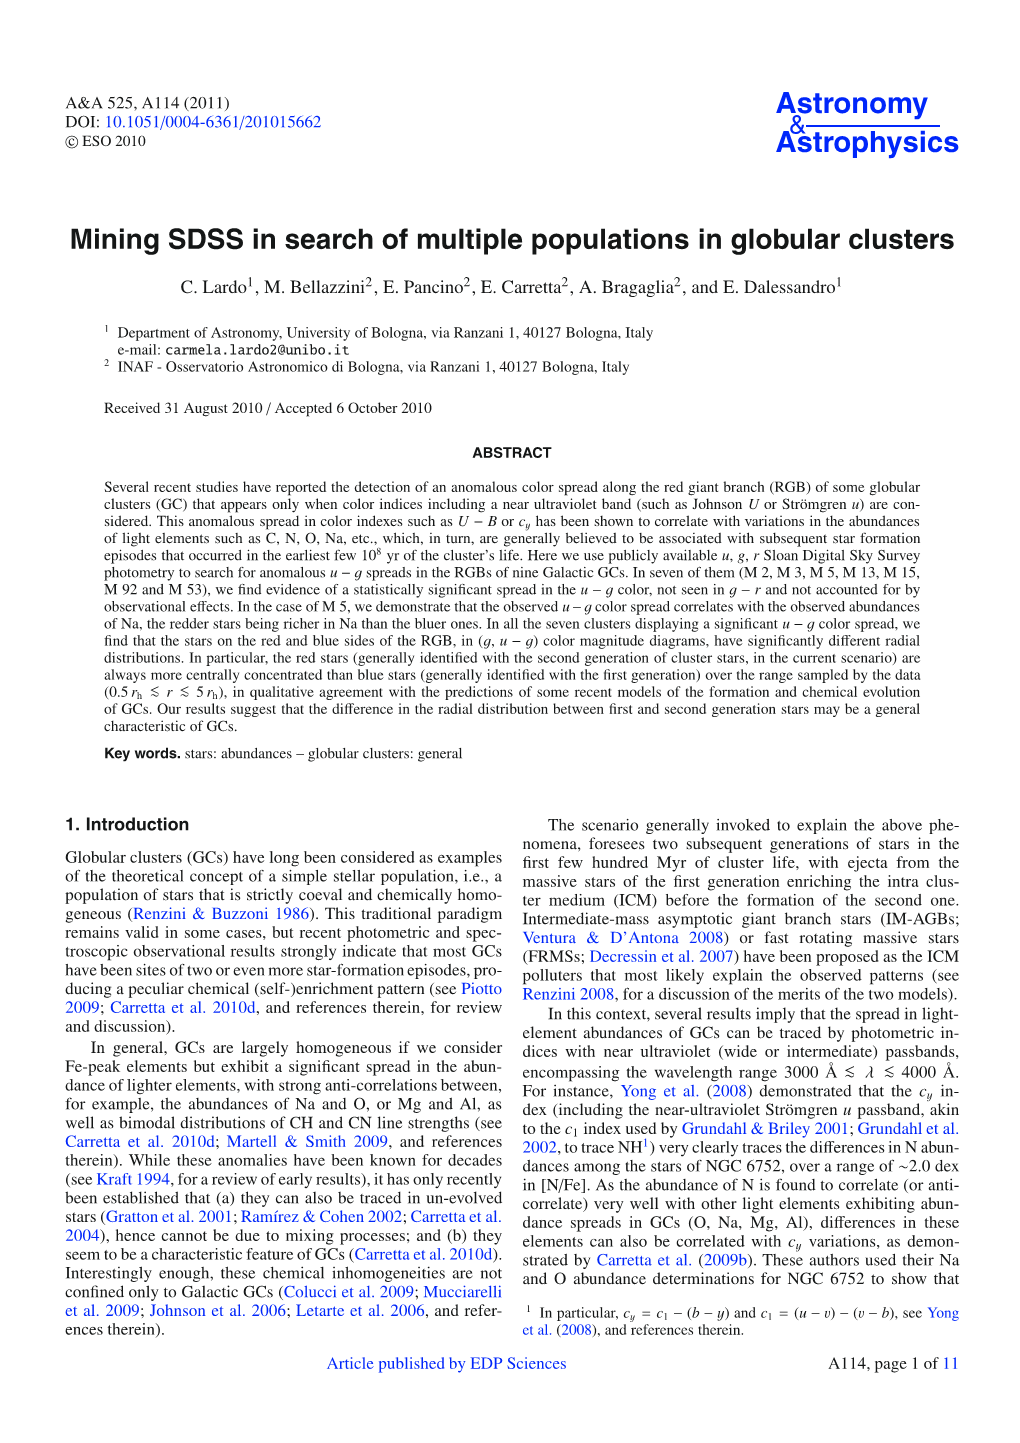 Mining SDSS in Search of Multiple Populations in Globular Clusters